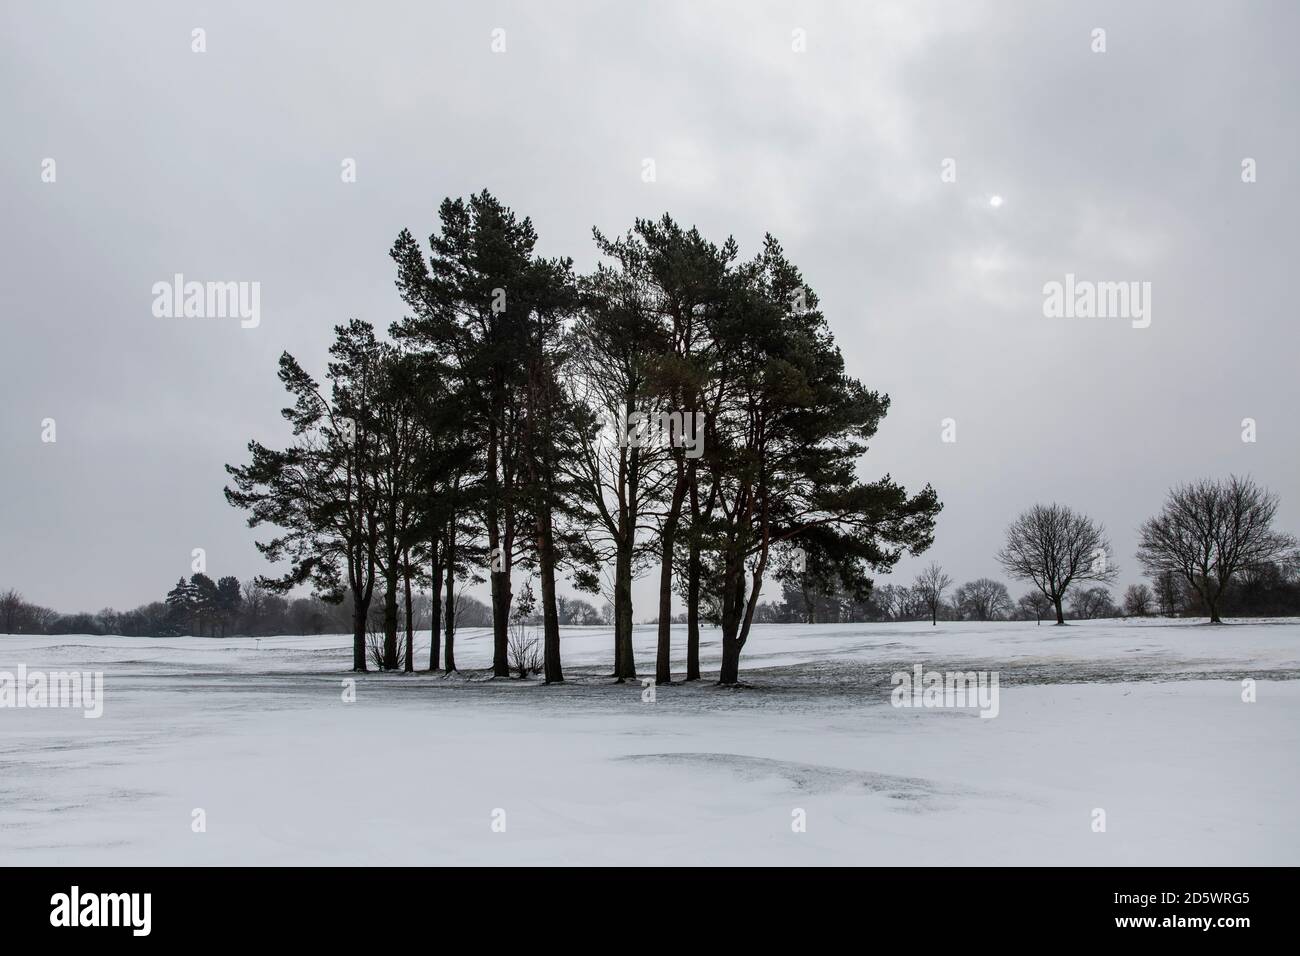 Winter landscape with pine trees Stock Photo